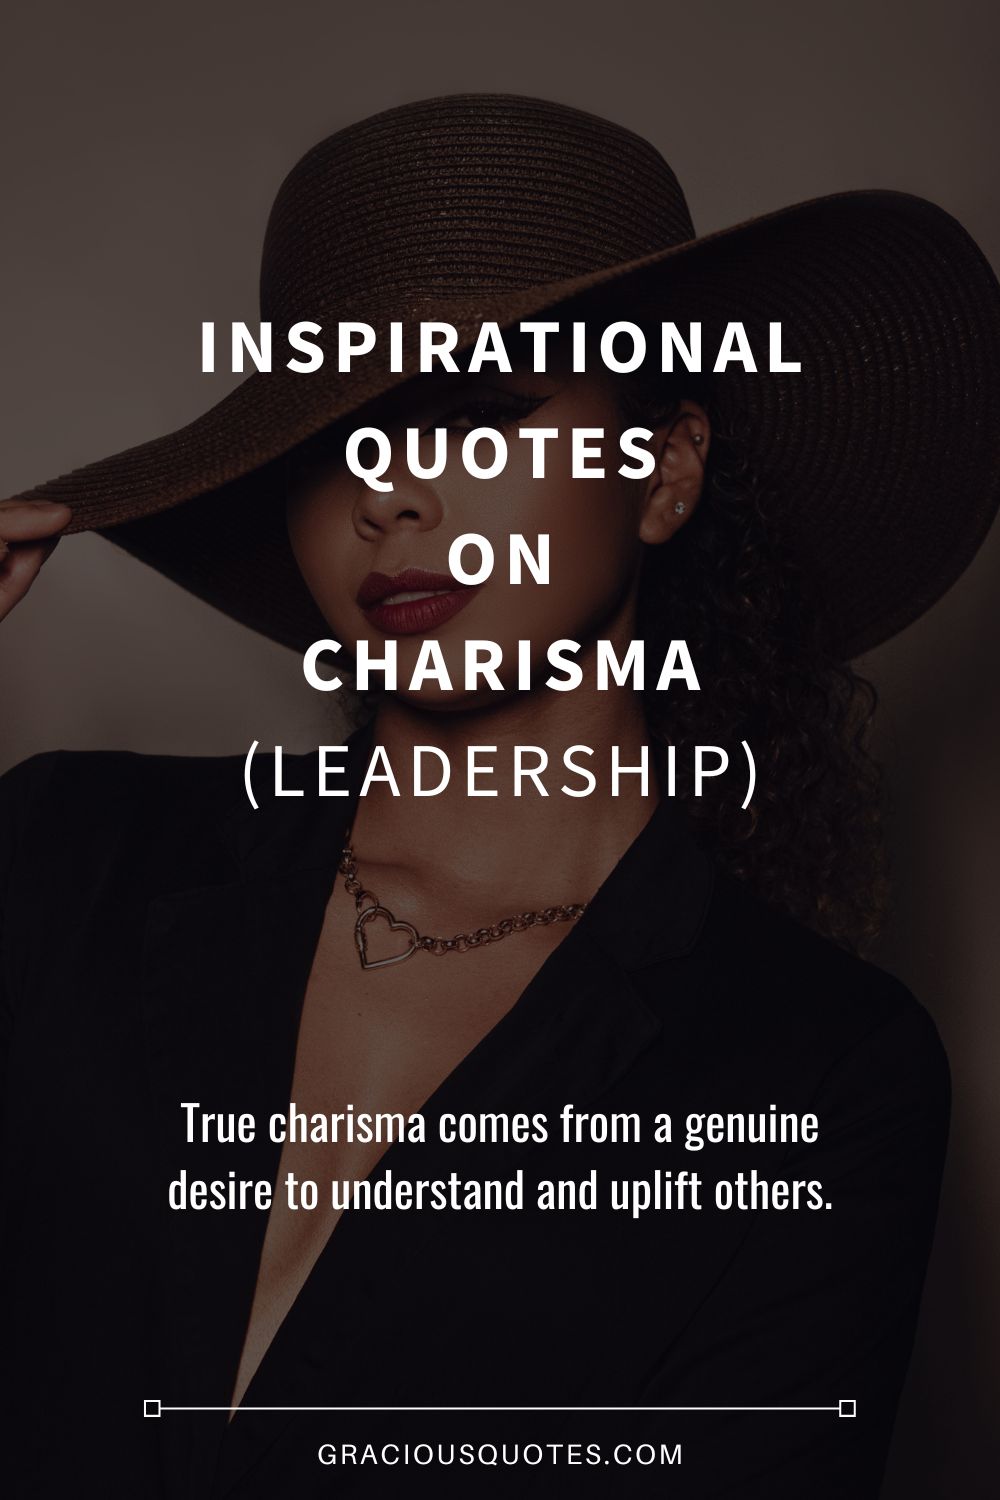 Inspirational Quotes on Charisma (LEADERSHIP) - Gracious Quotes